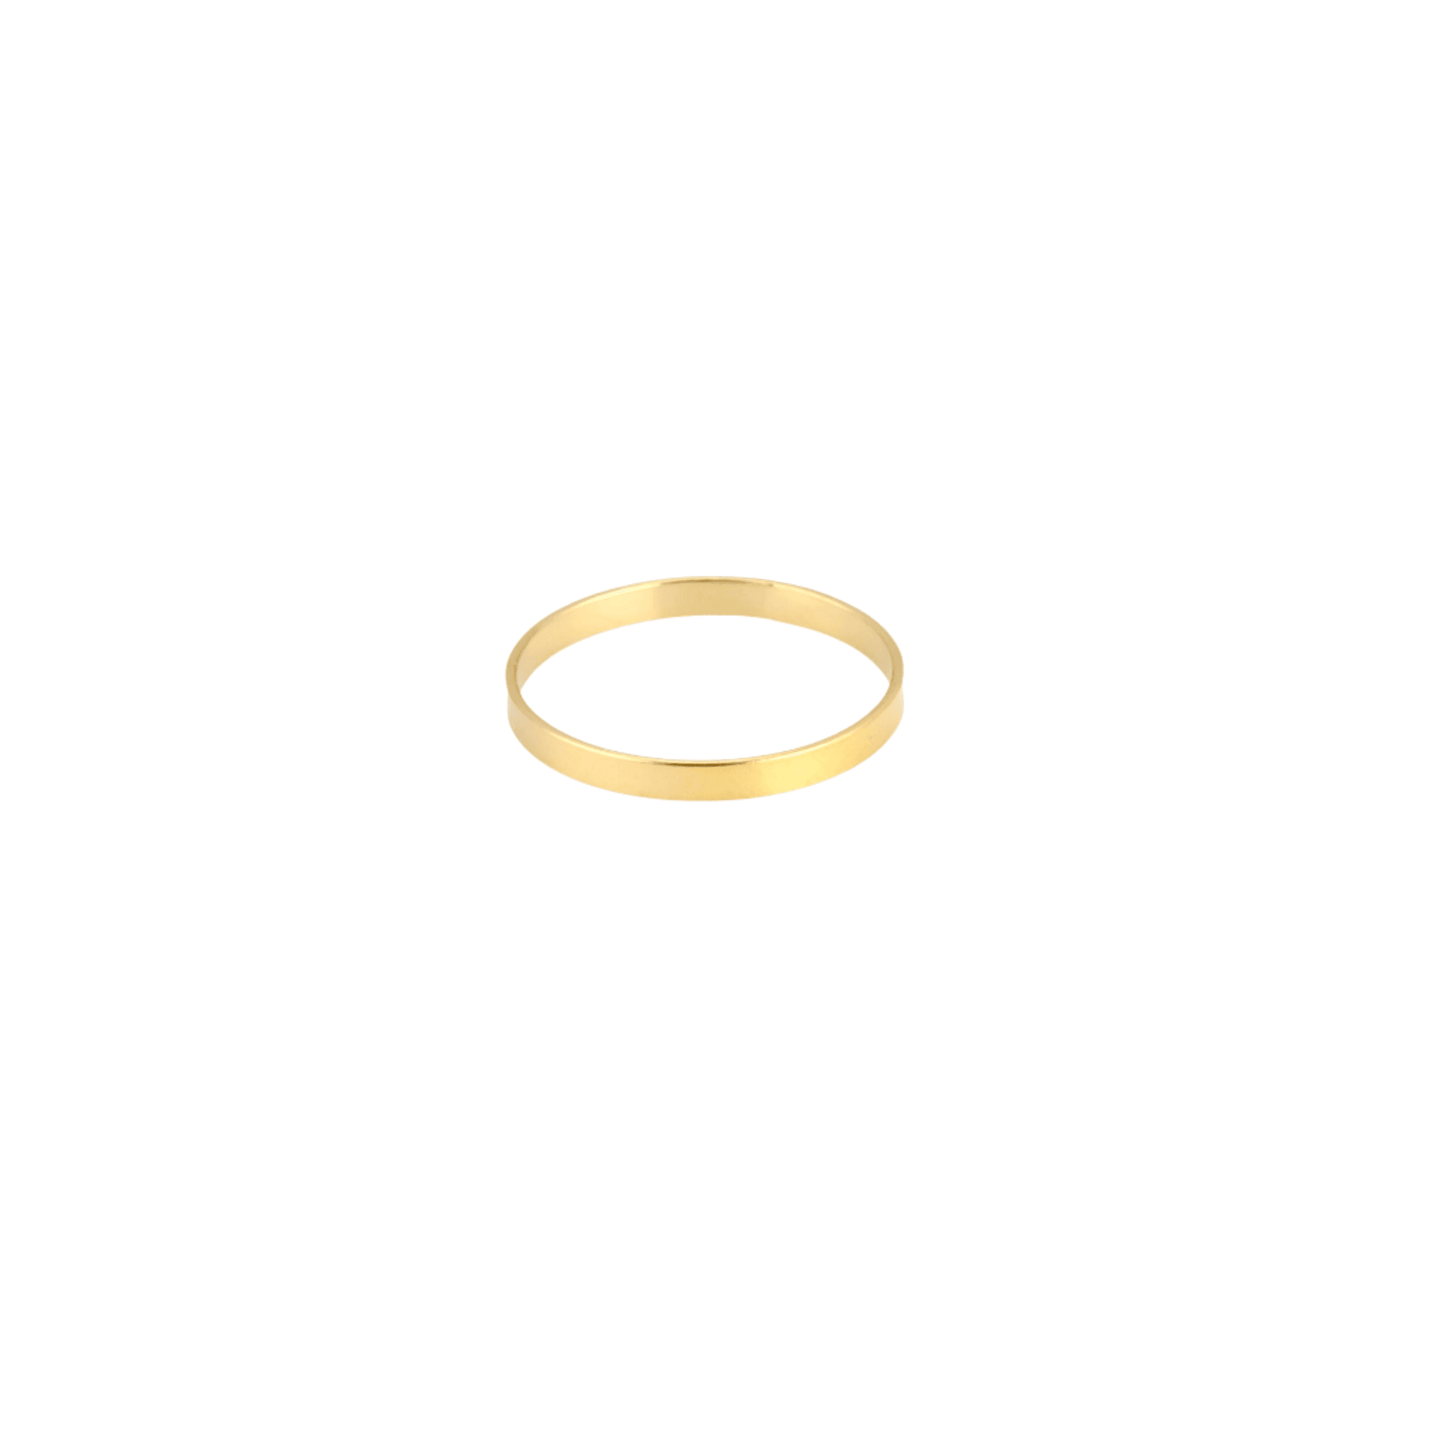 Maeve 2.3 mm Stacker Band Ring - MILANA JEWELRY 